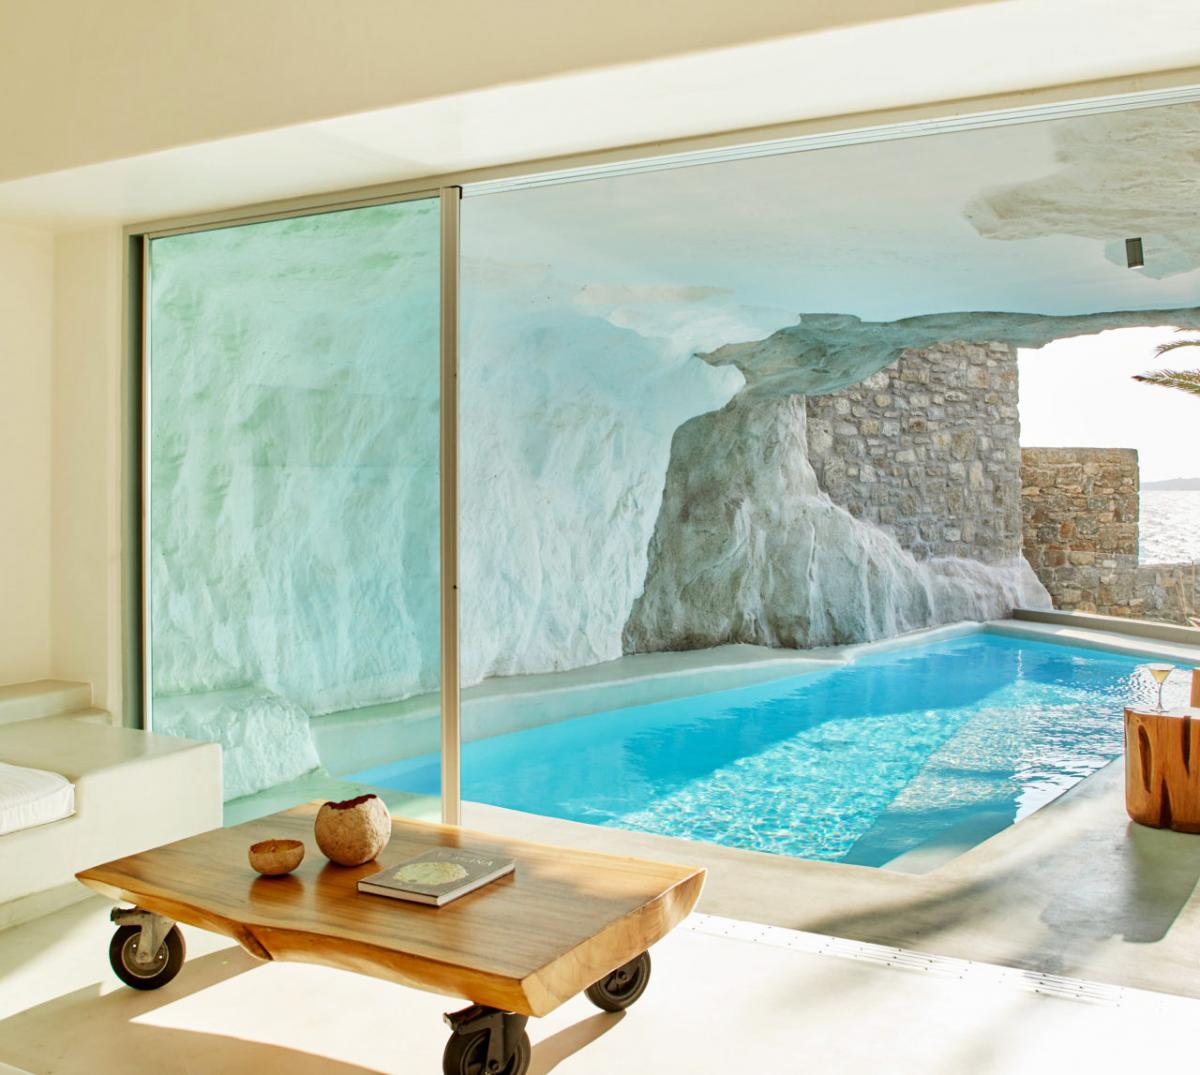 Hotel with private pool - Cavo Tagoo Mykonos